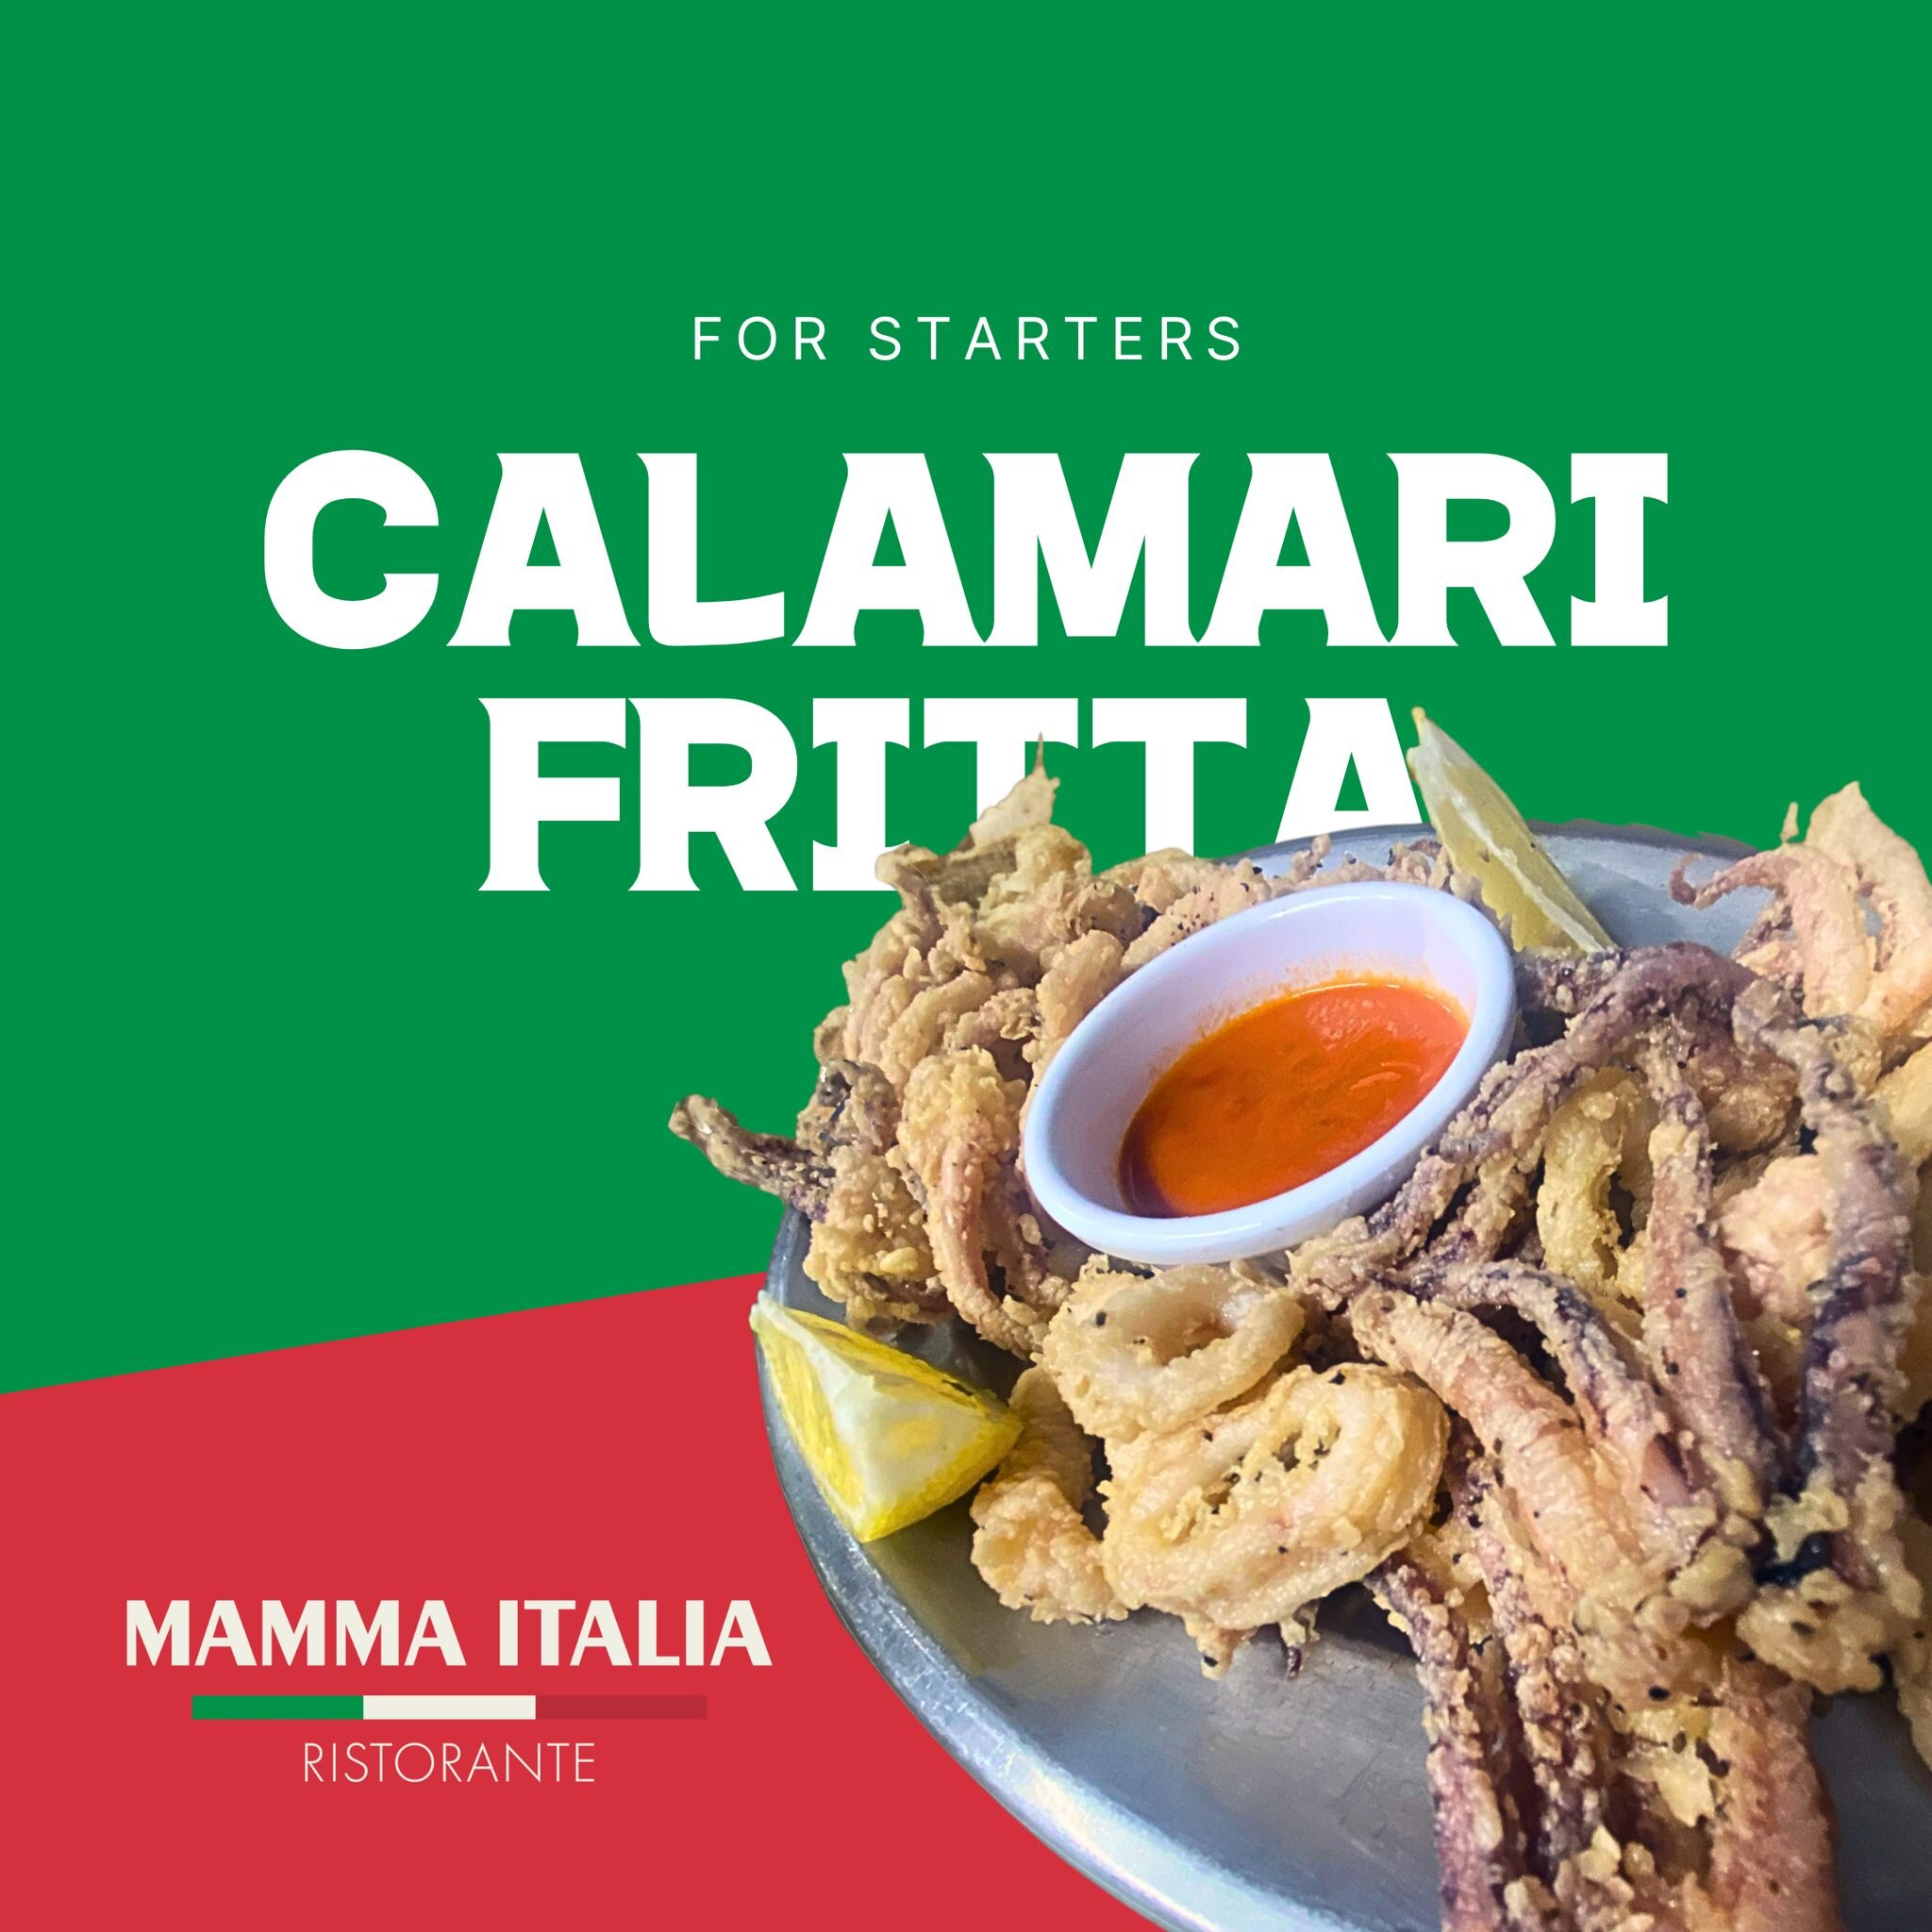 We're continuing to feature our appetizers with our very popular Calamari Fritta, served with our house marinara. Try it tonight!